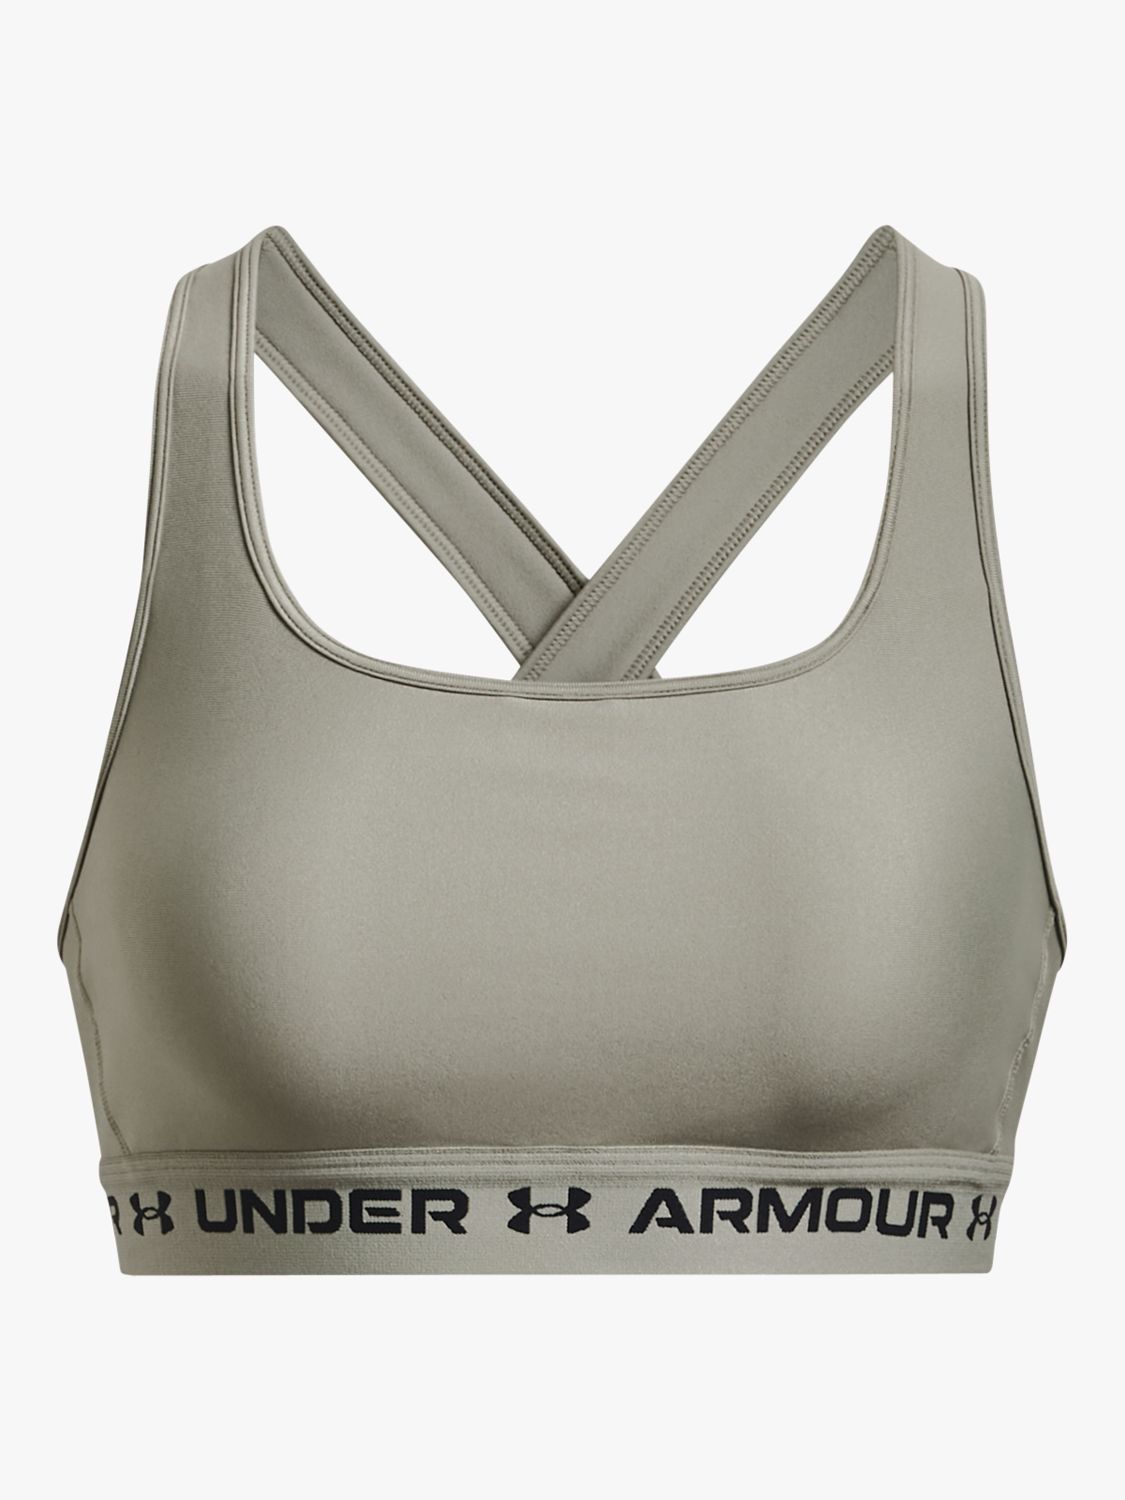 NEW Under Armour Women's Gray Crossback Mid Compression Sports Bra